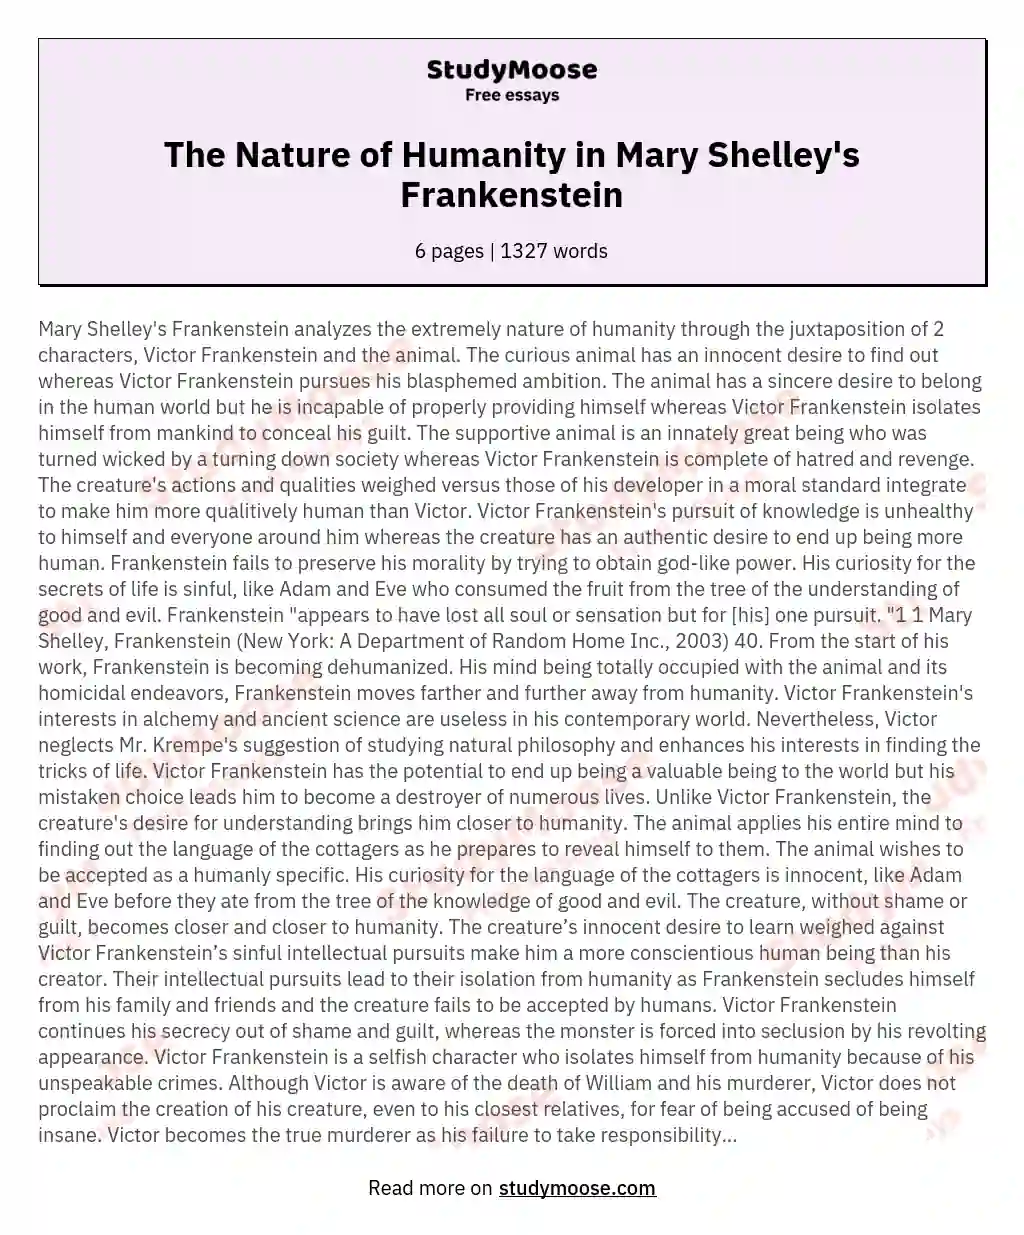 The Nature of Humanity in Mary Shelley's Frankenstein